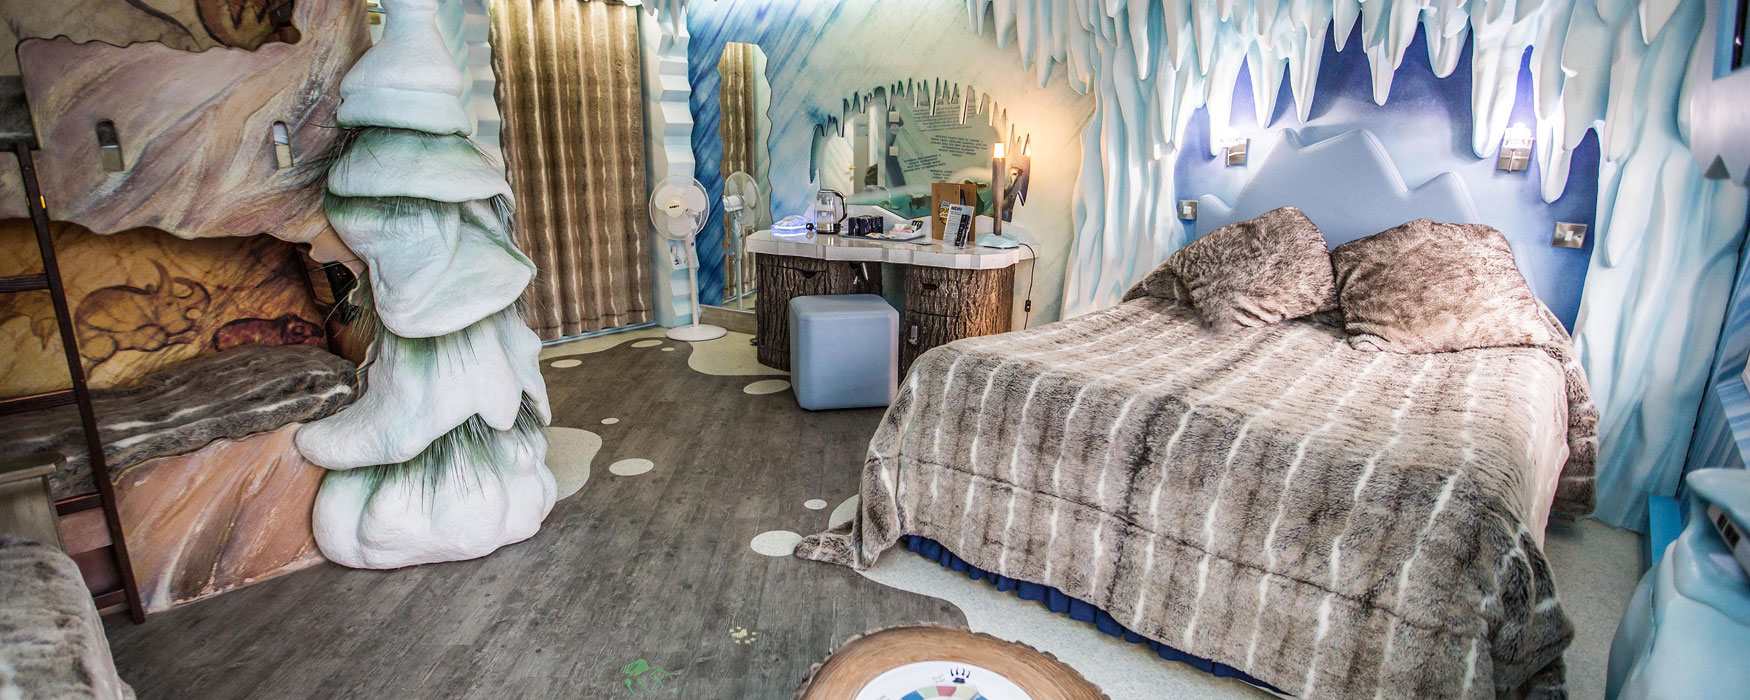 themed rooms include ice age at alton towers